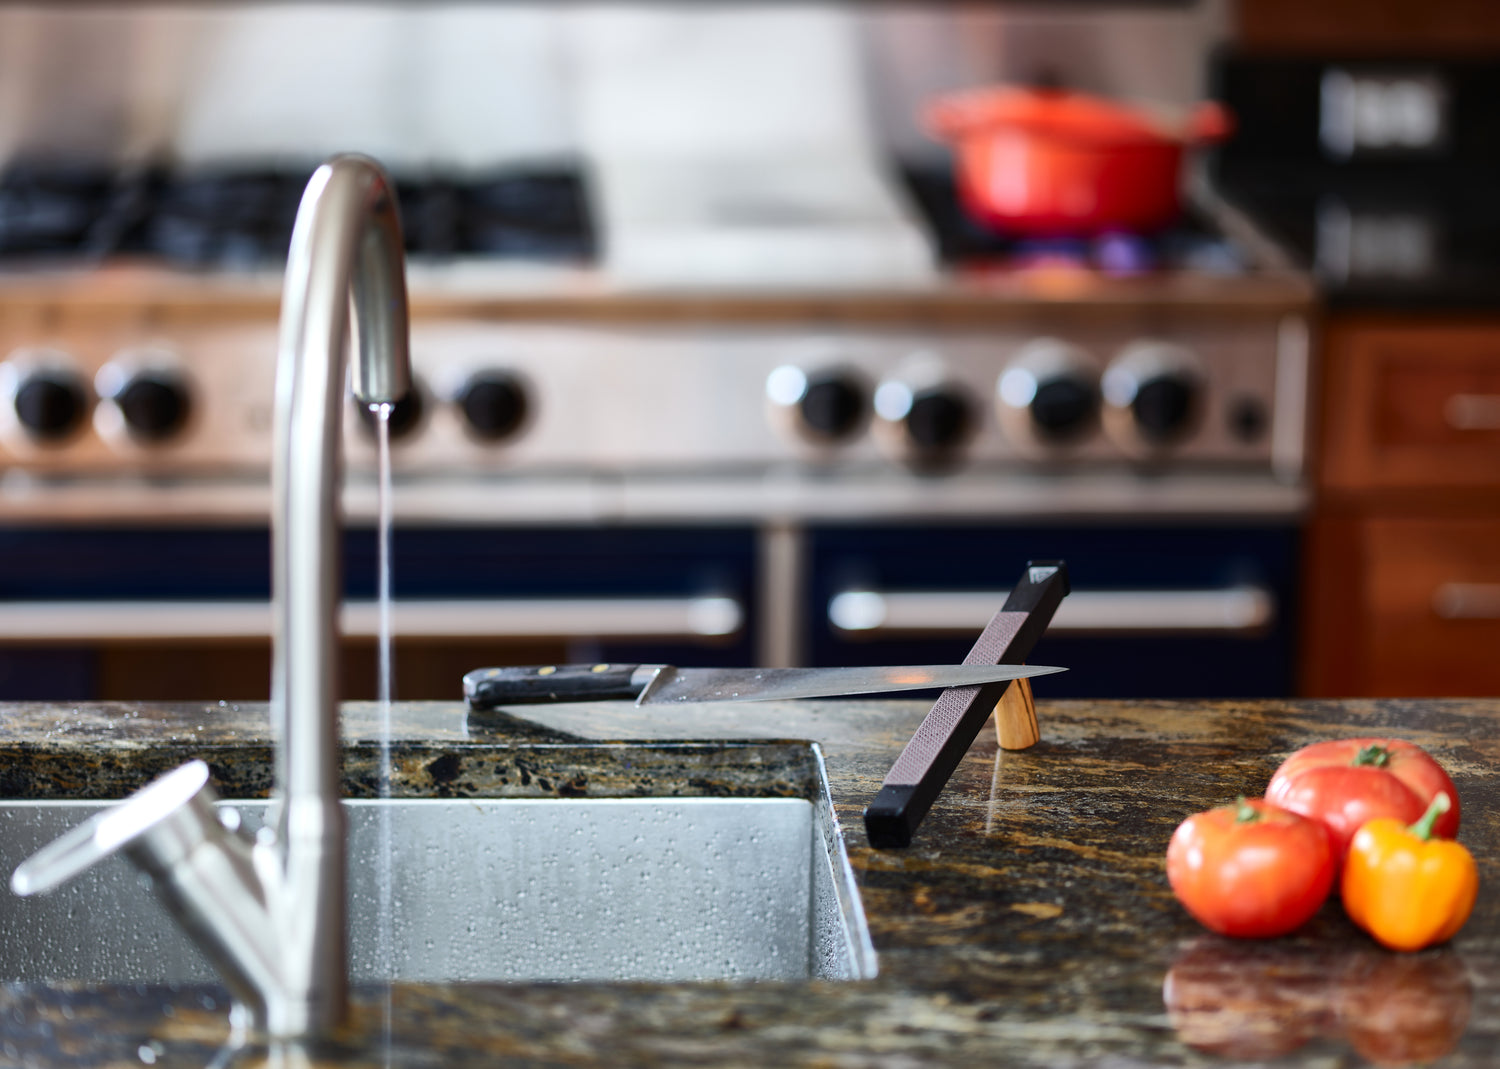 A sharp knife rests on a diamond ceramic kitchen strop in a kitchen with trickling water from a sink and tomatoes in the foreground